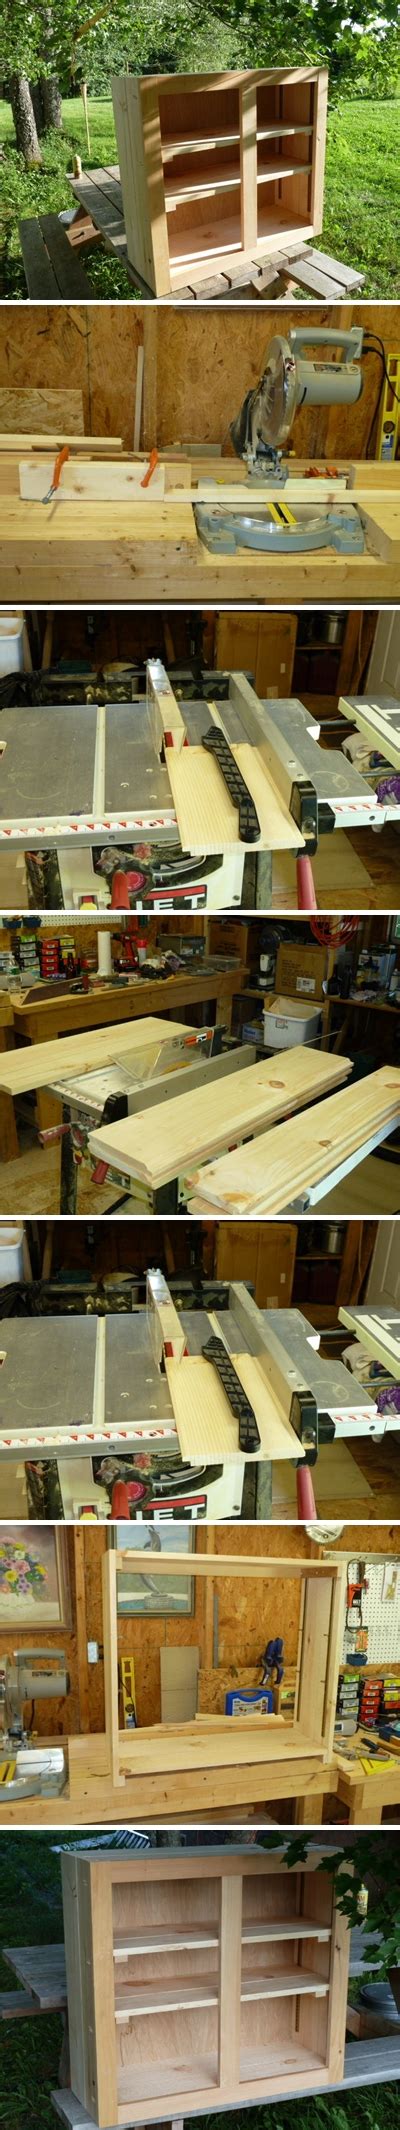 How to build a diy rolling kitchen cart. How to build your own kitchen cabinets step by step DIY ...